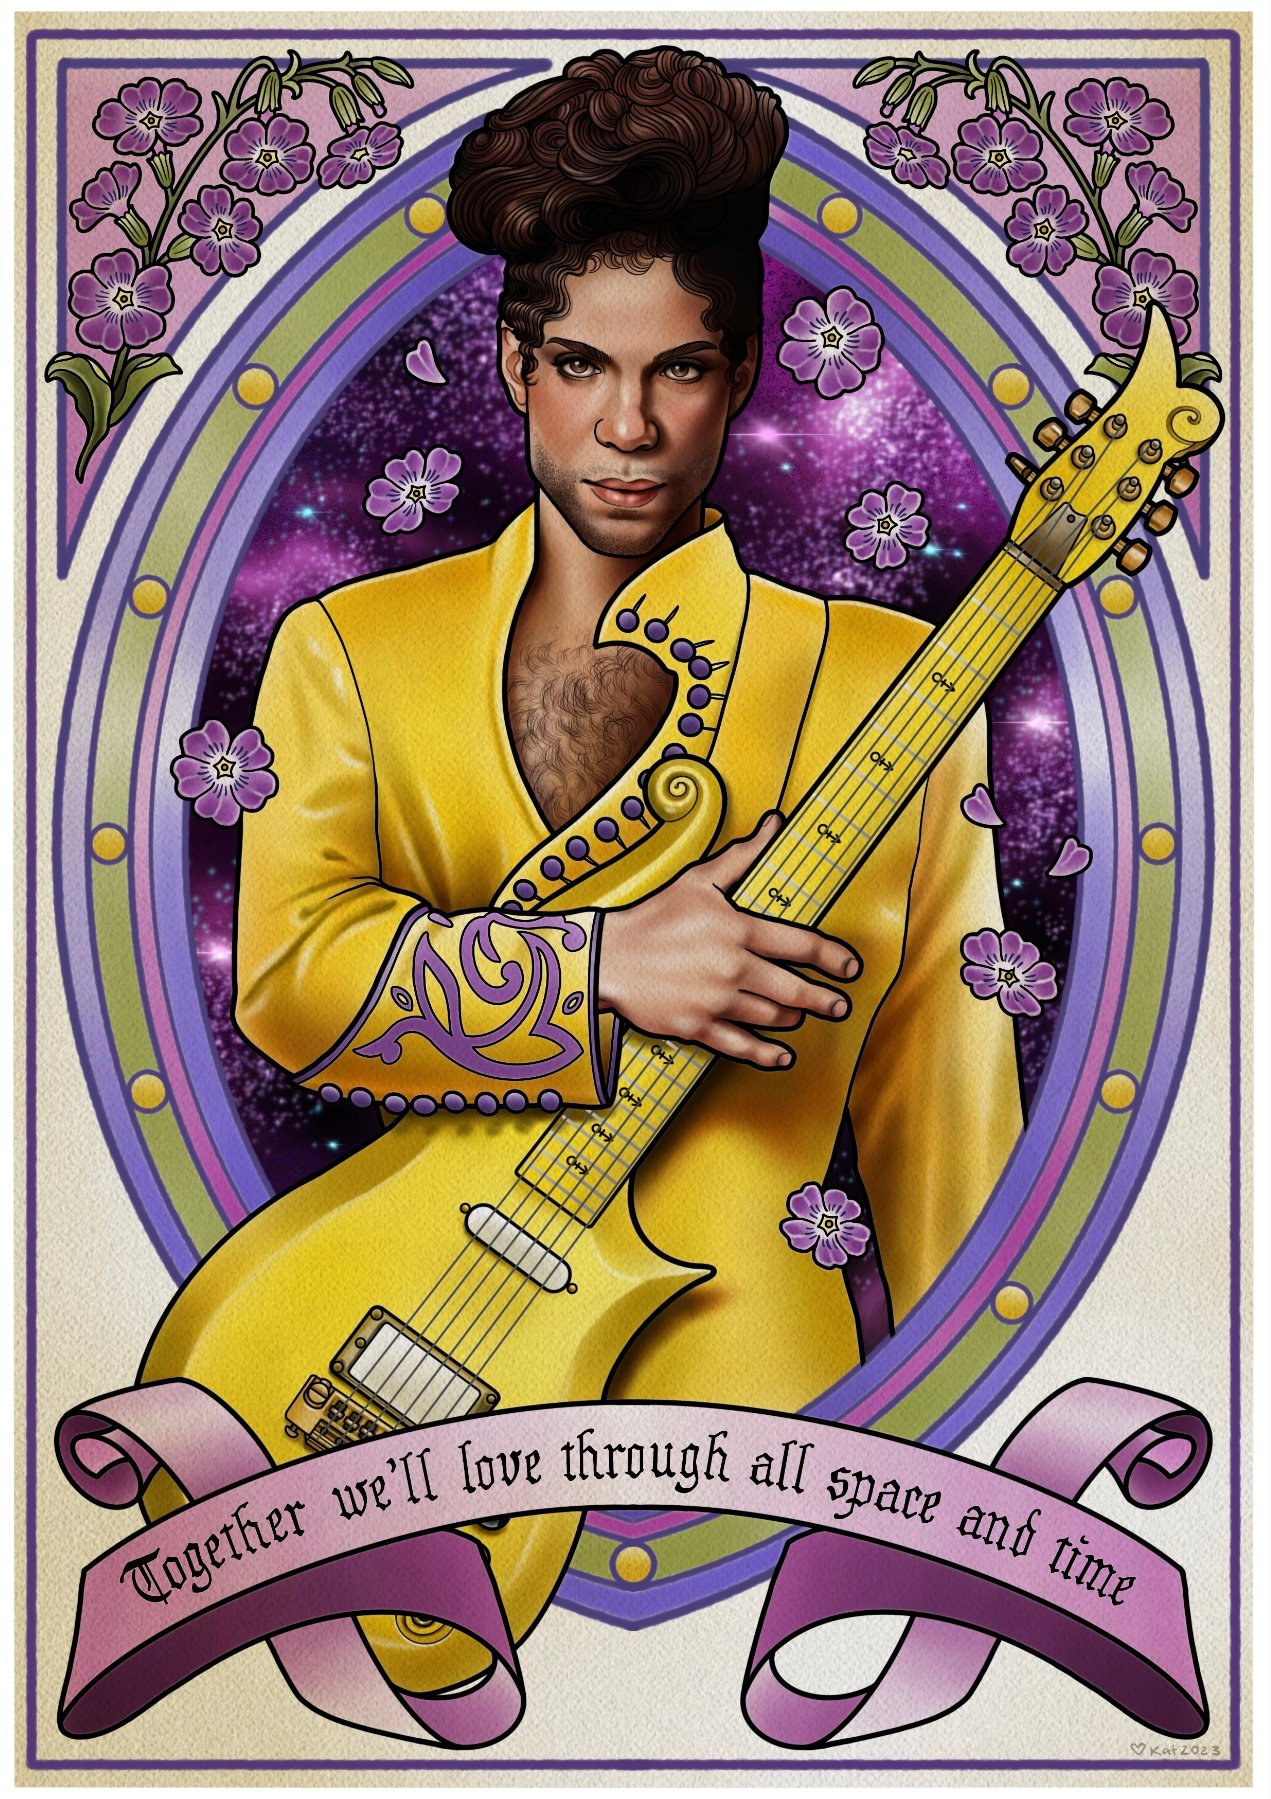 (The artist formerly known as) Prince 